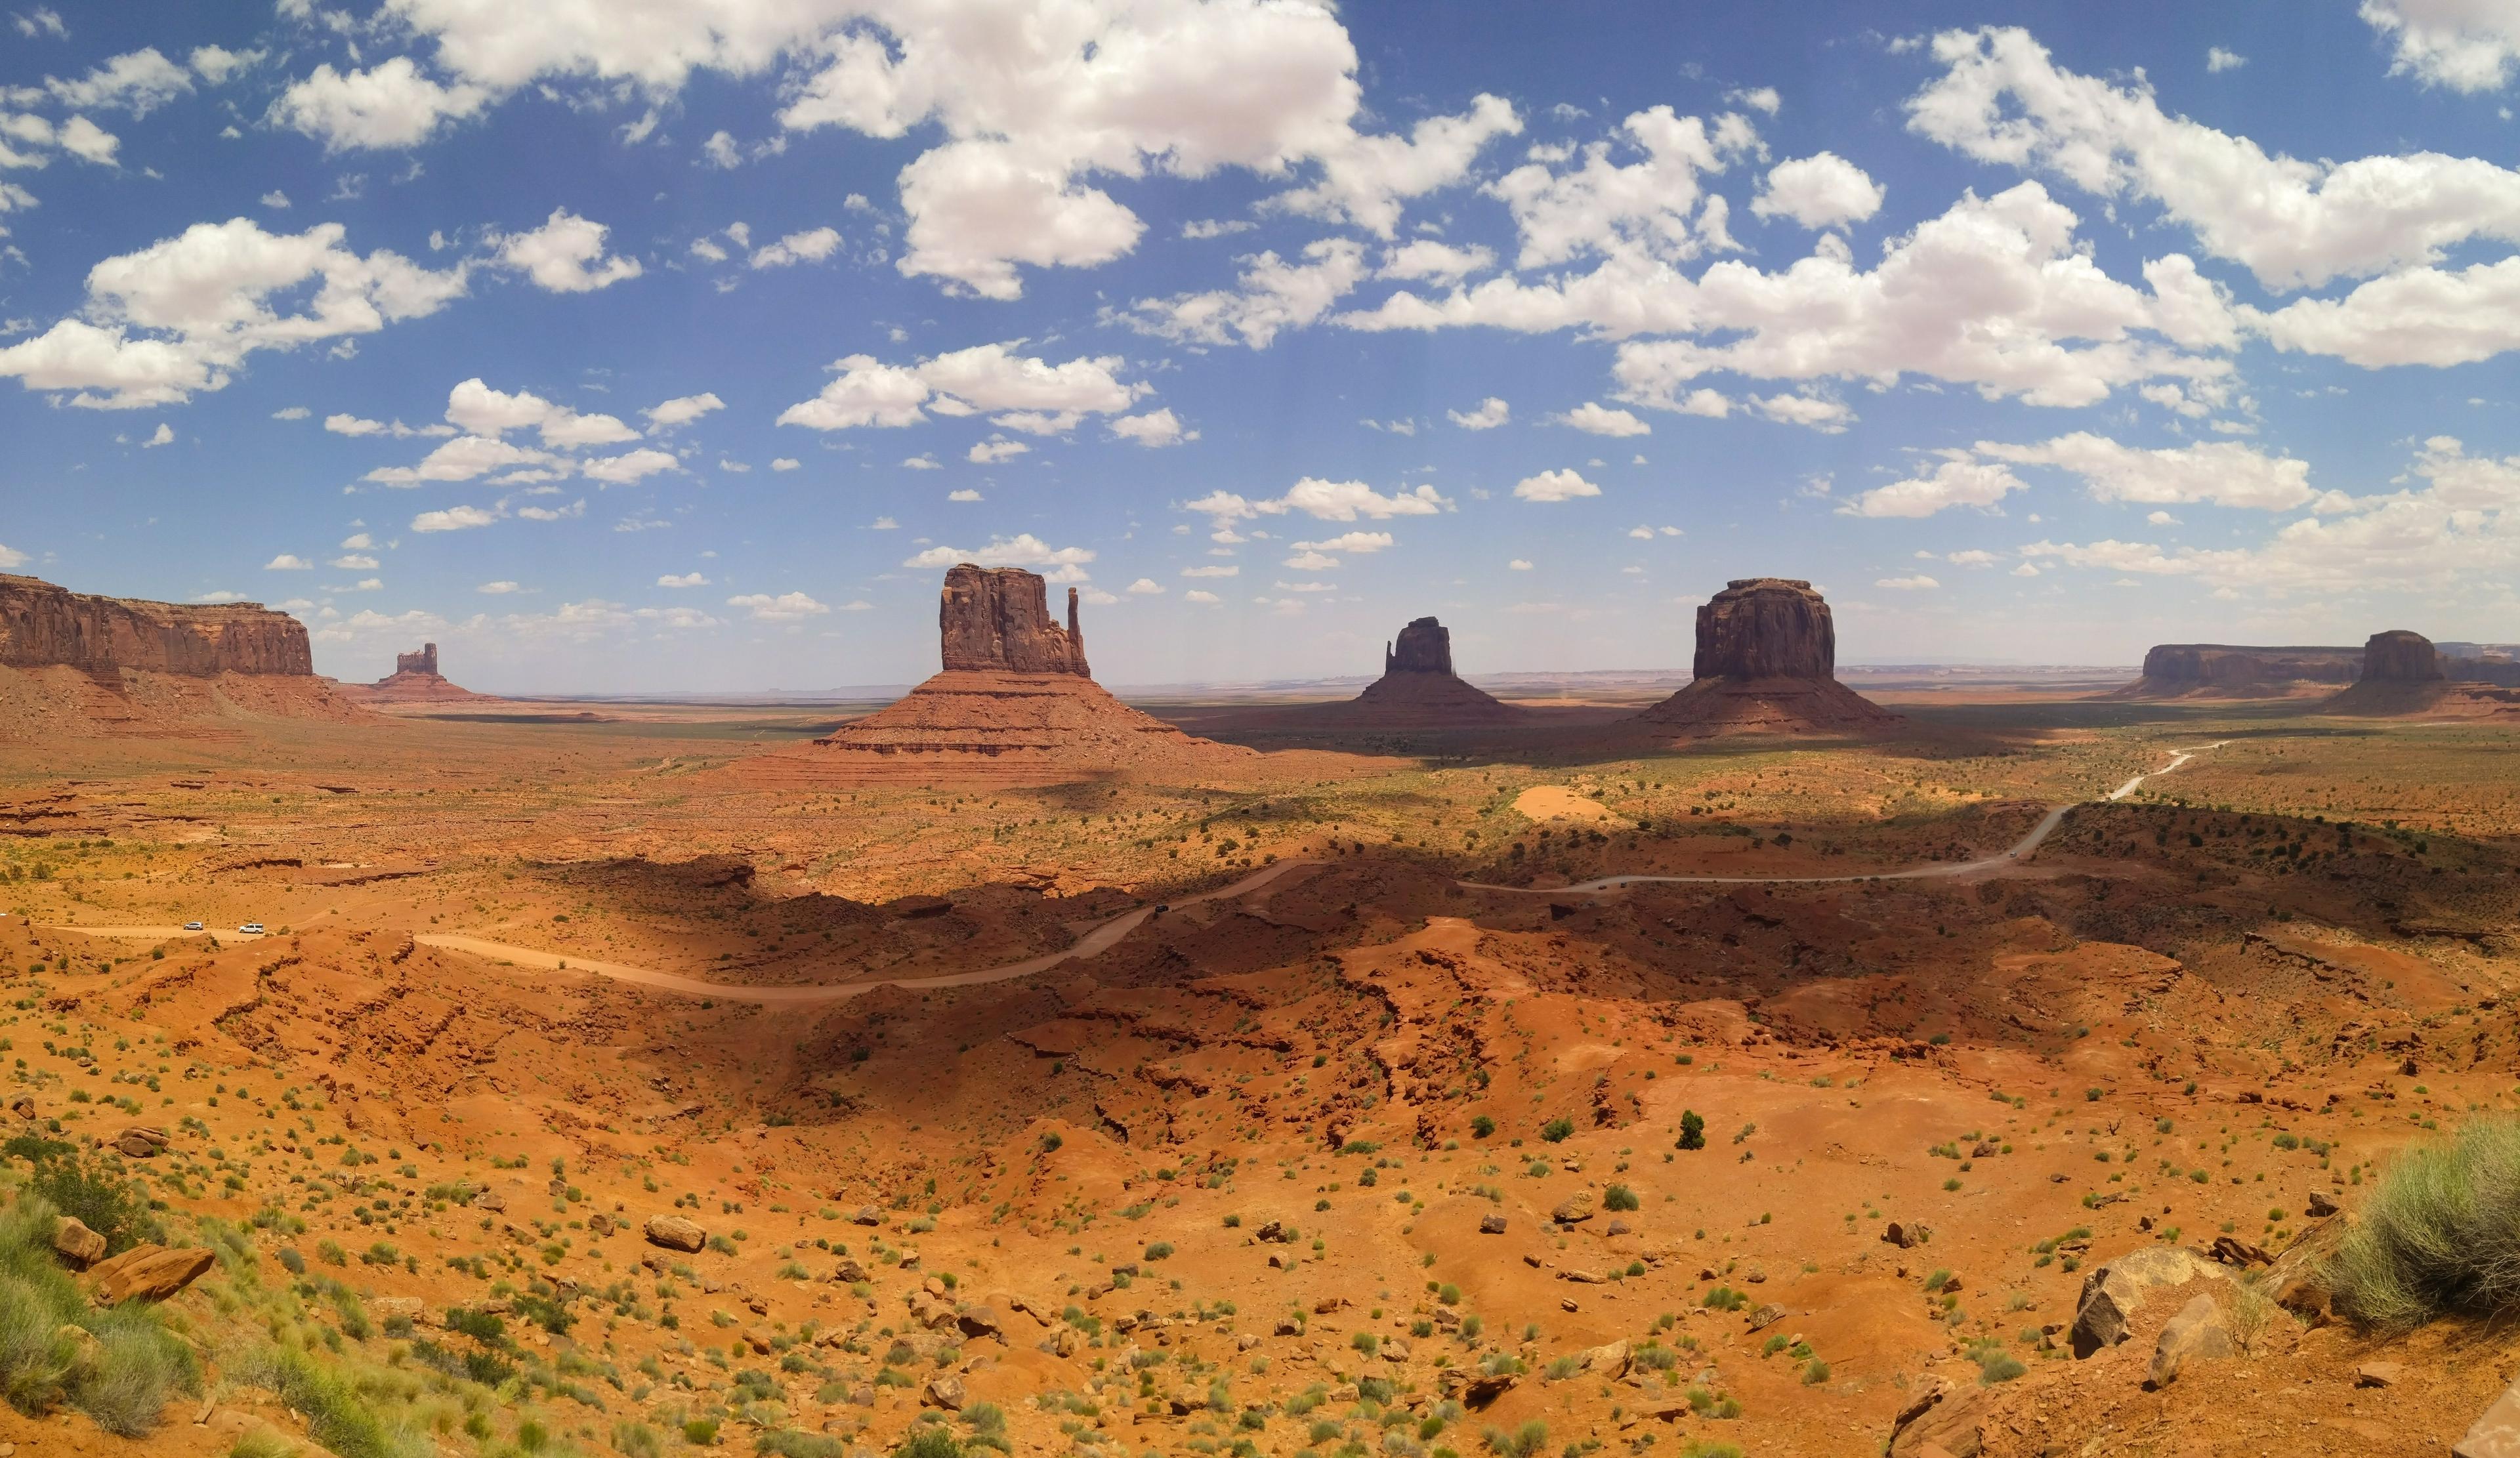 A southwestern landscape, with rock formations and white clouds in a blue sky